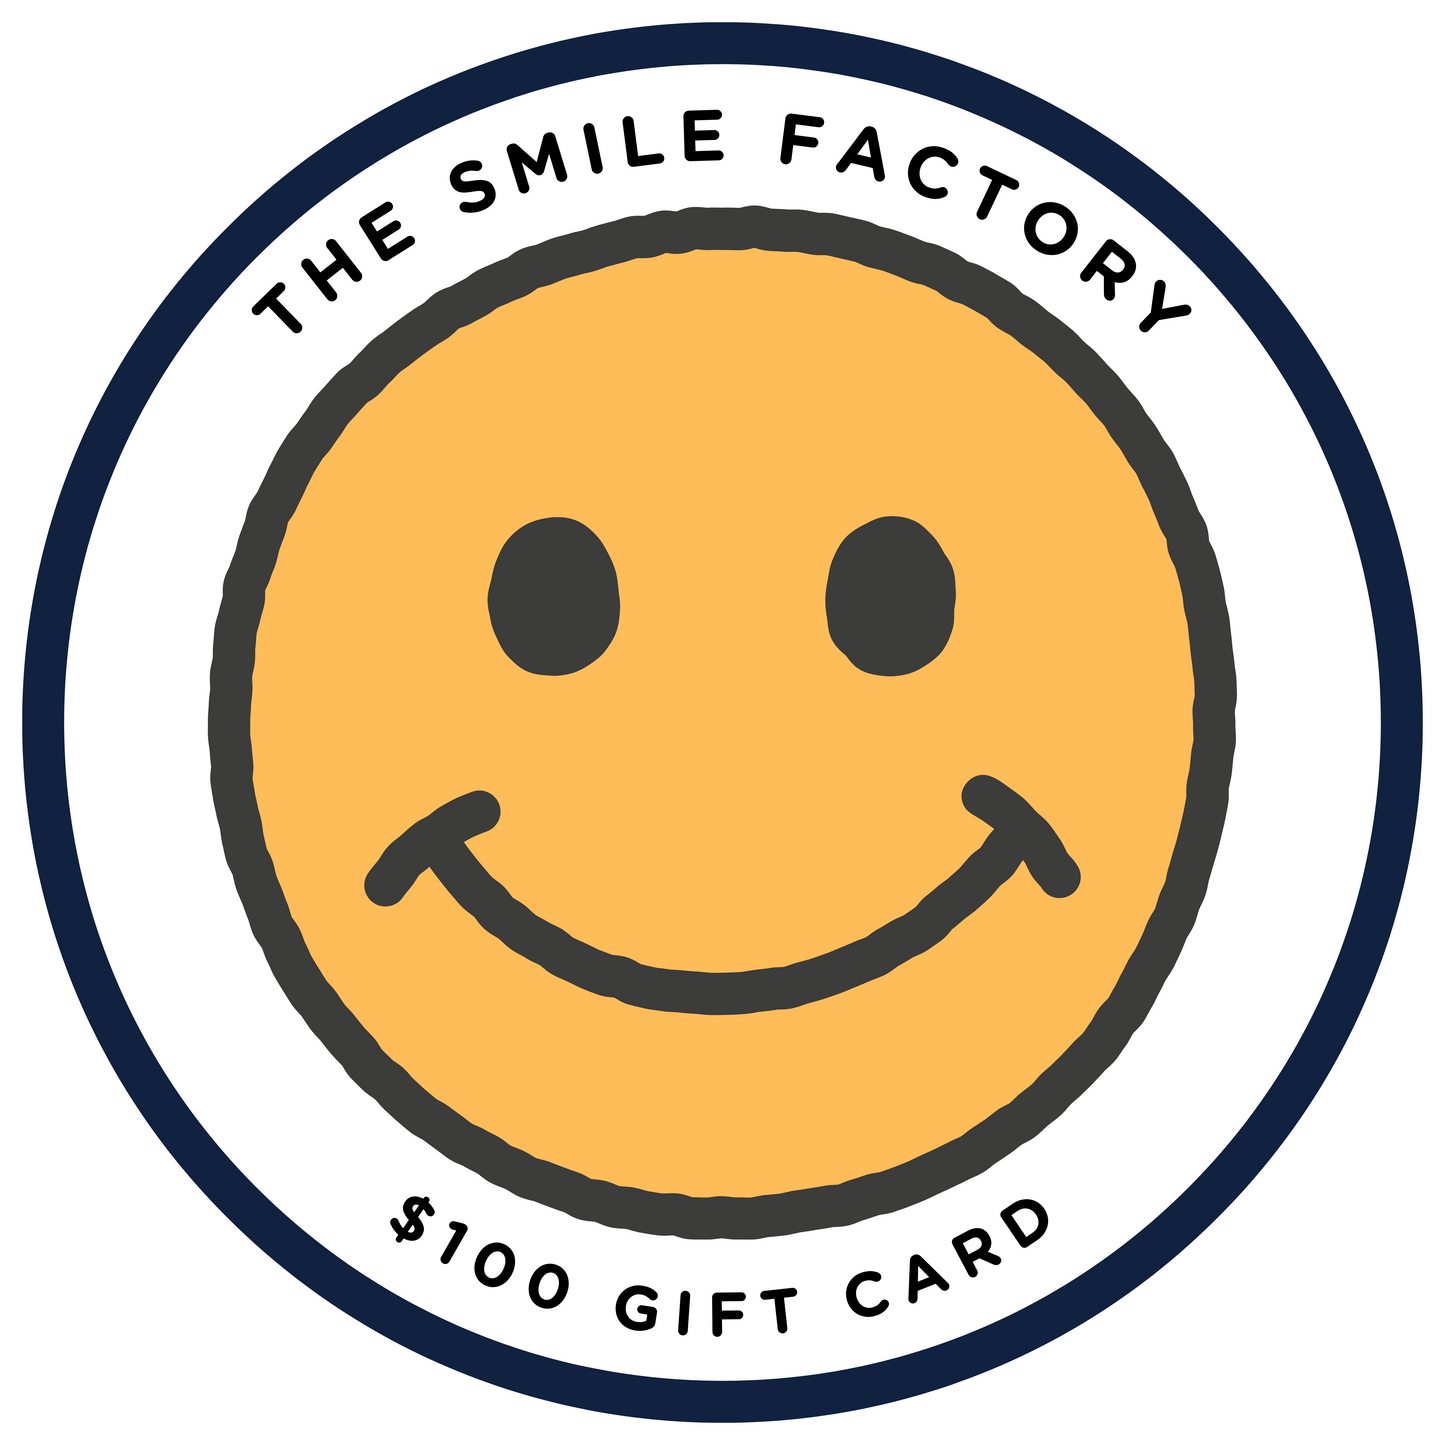 The Smile Factory Gift Card